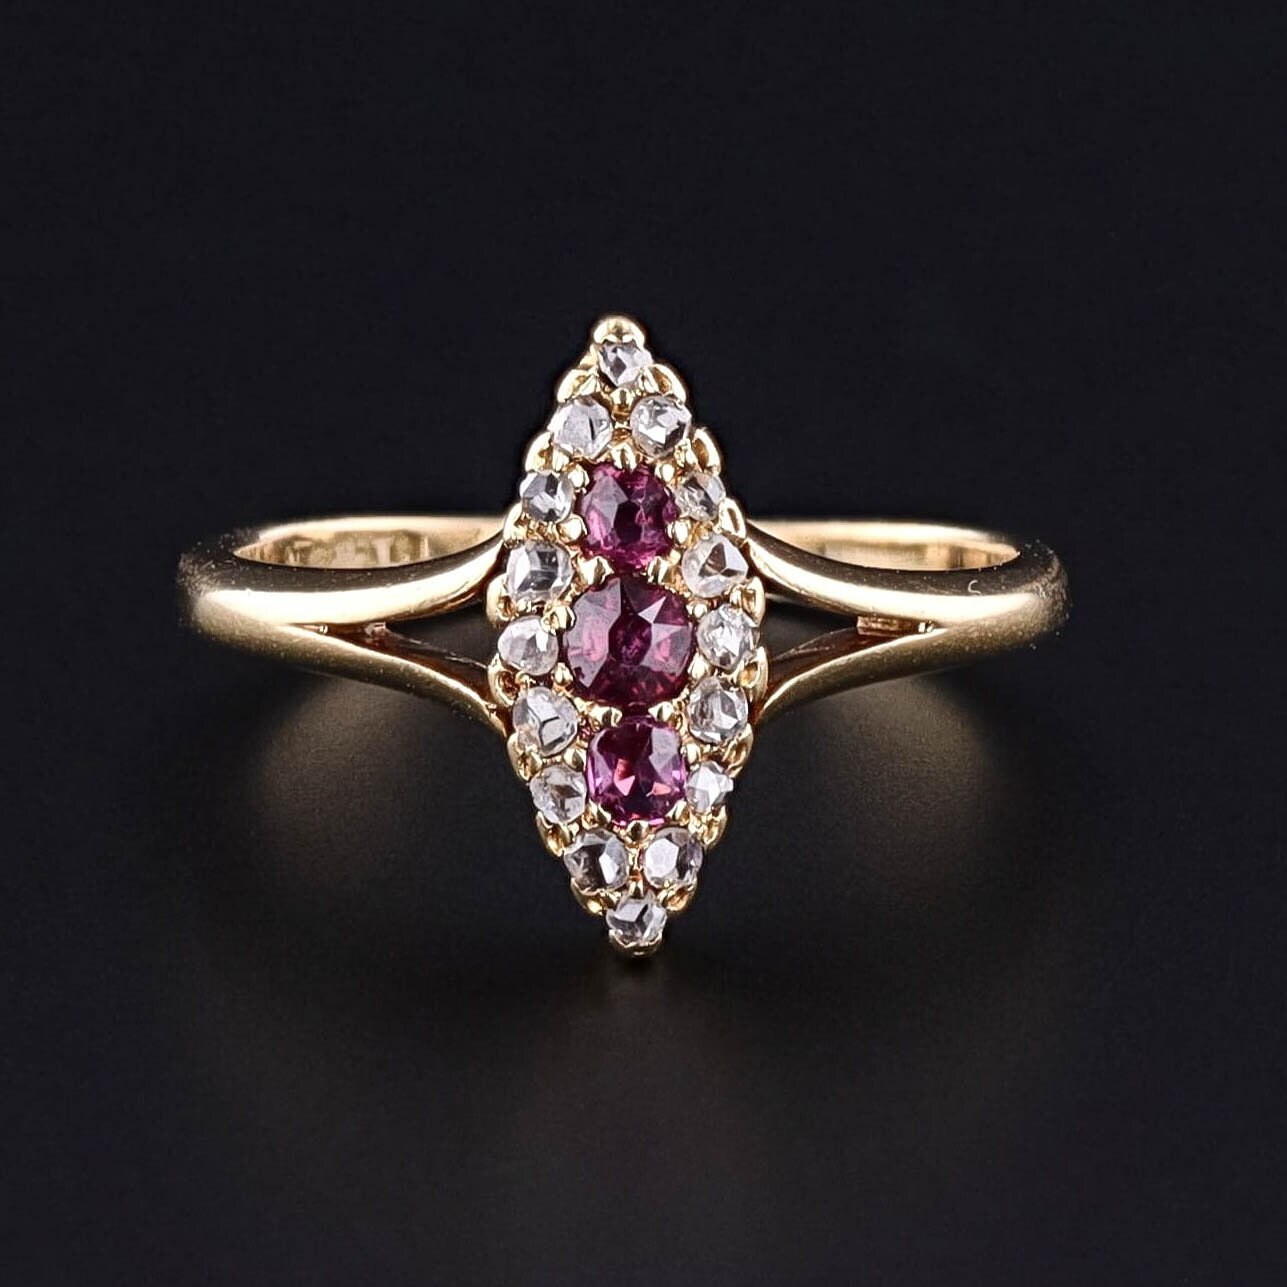 A ruby and diamond navette ring from the late Victorian era - circa 1890. The ring is 18k gold and can be re-sized.